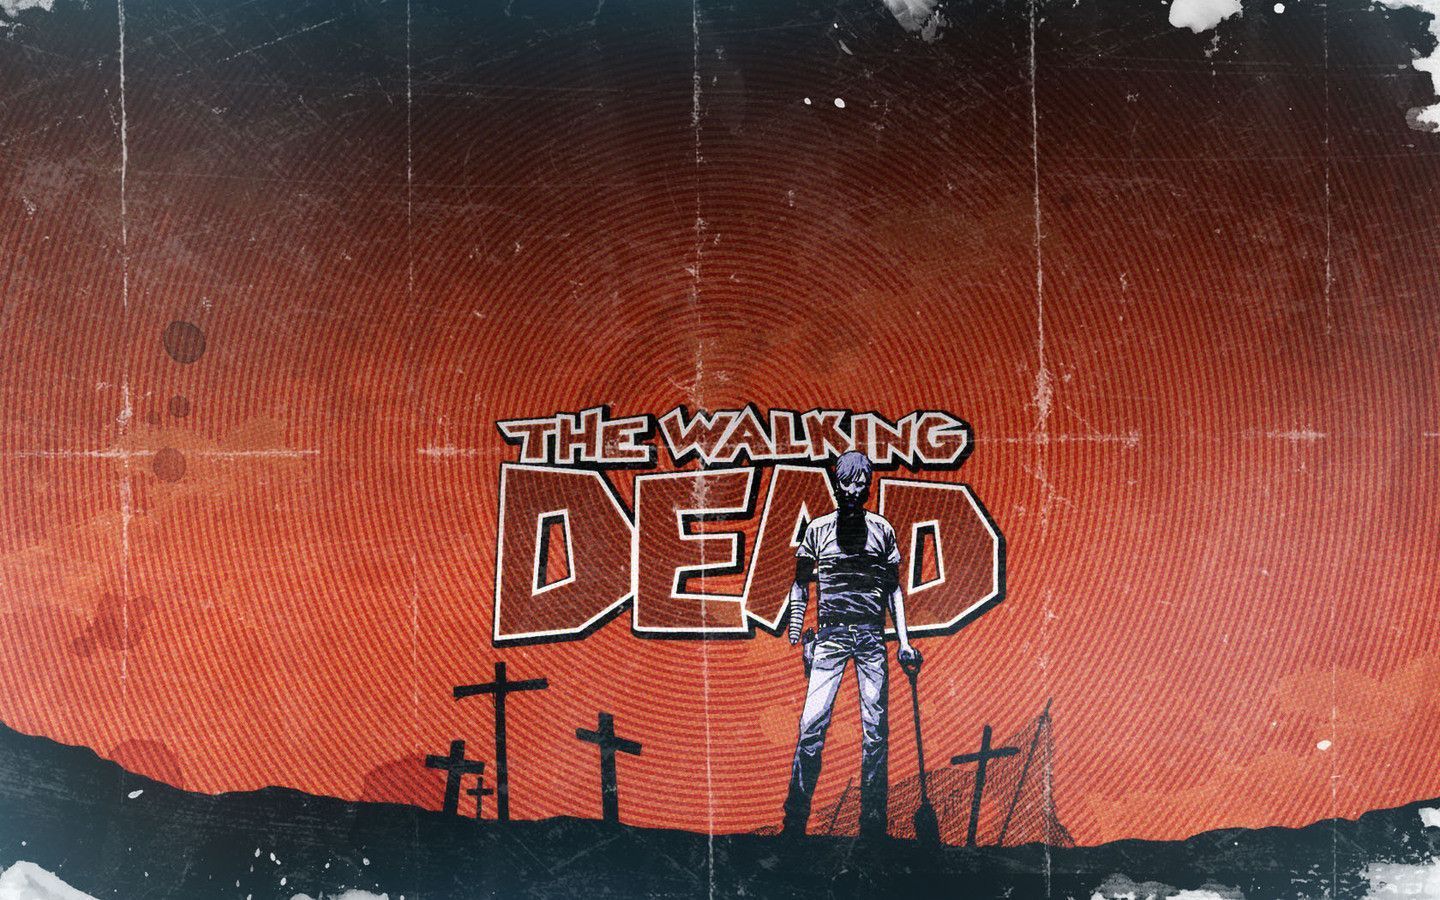 The Walking Dead Comic Wallpaper Wallpapers, Backgrounds, Images